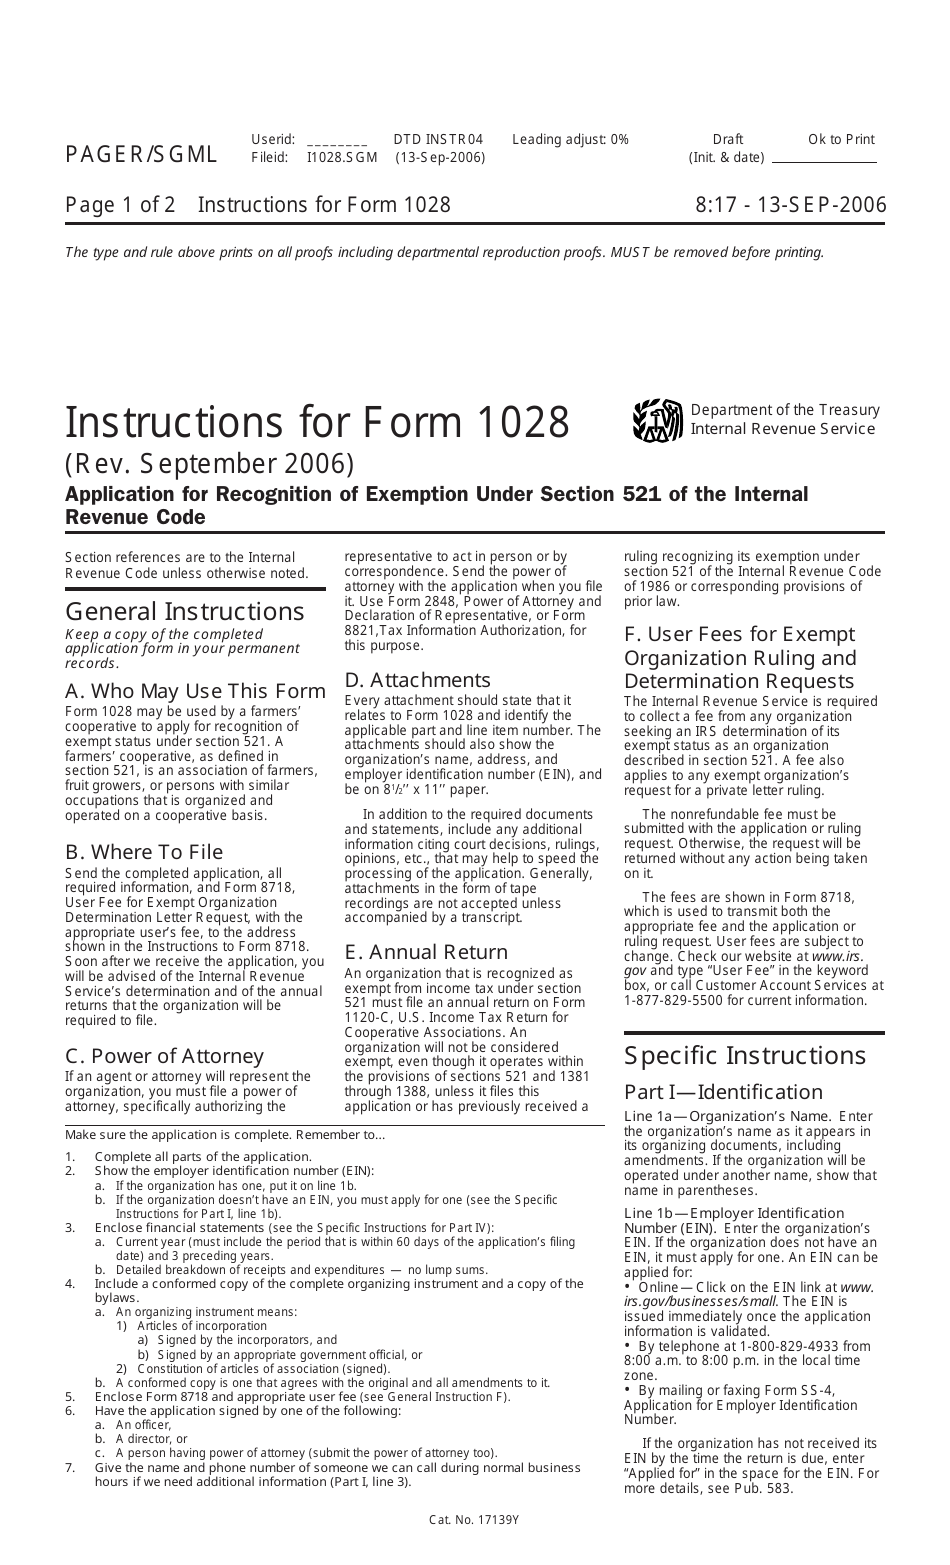 Instructions for IRS Form 1028 Application for Recognition of Exemption Under Section 521 of the Internal Revenue Code, Page 1